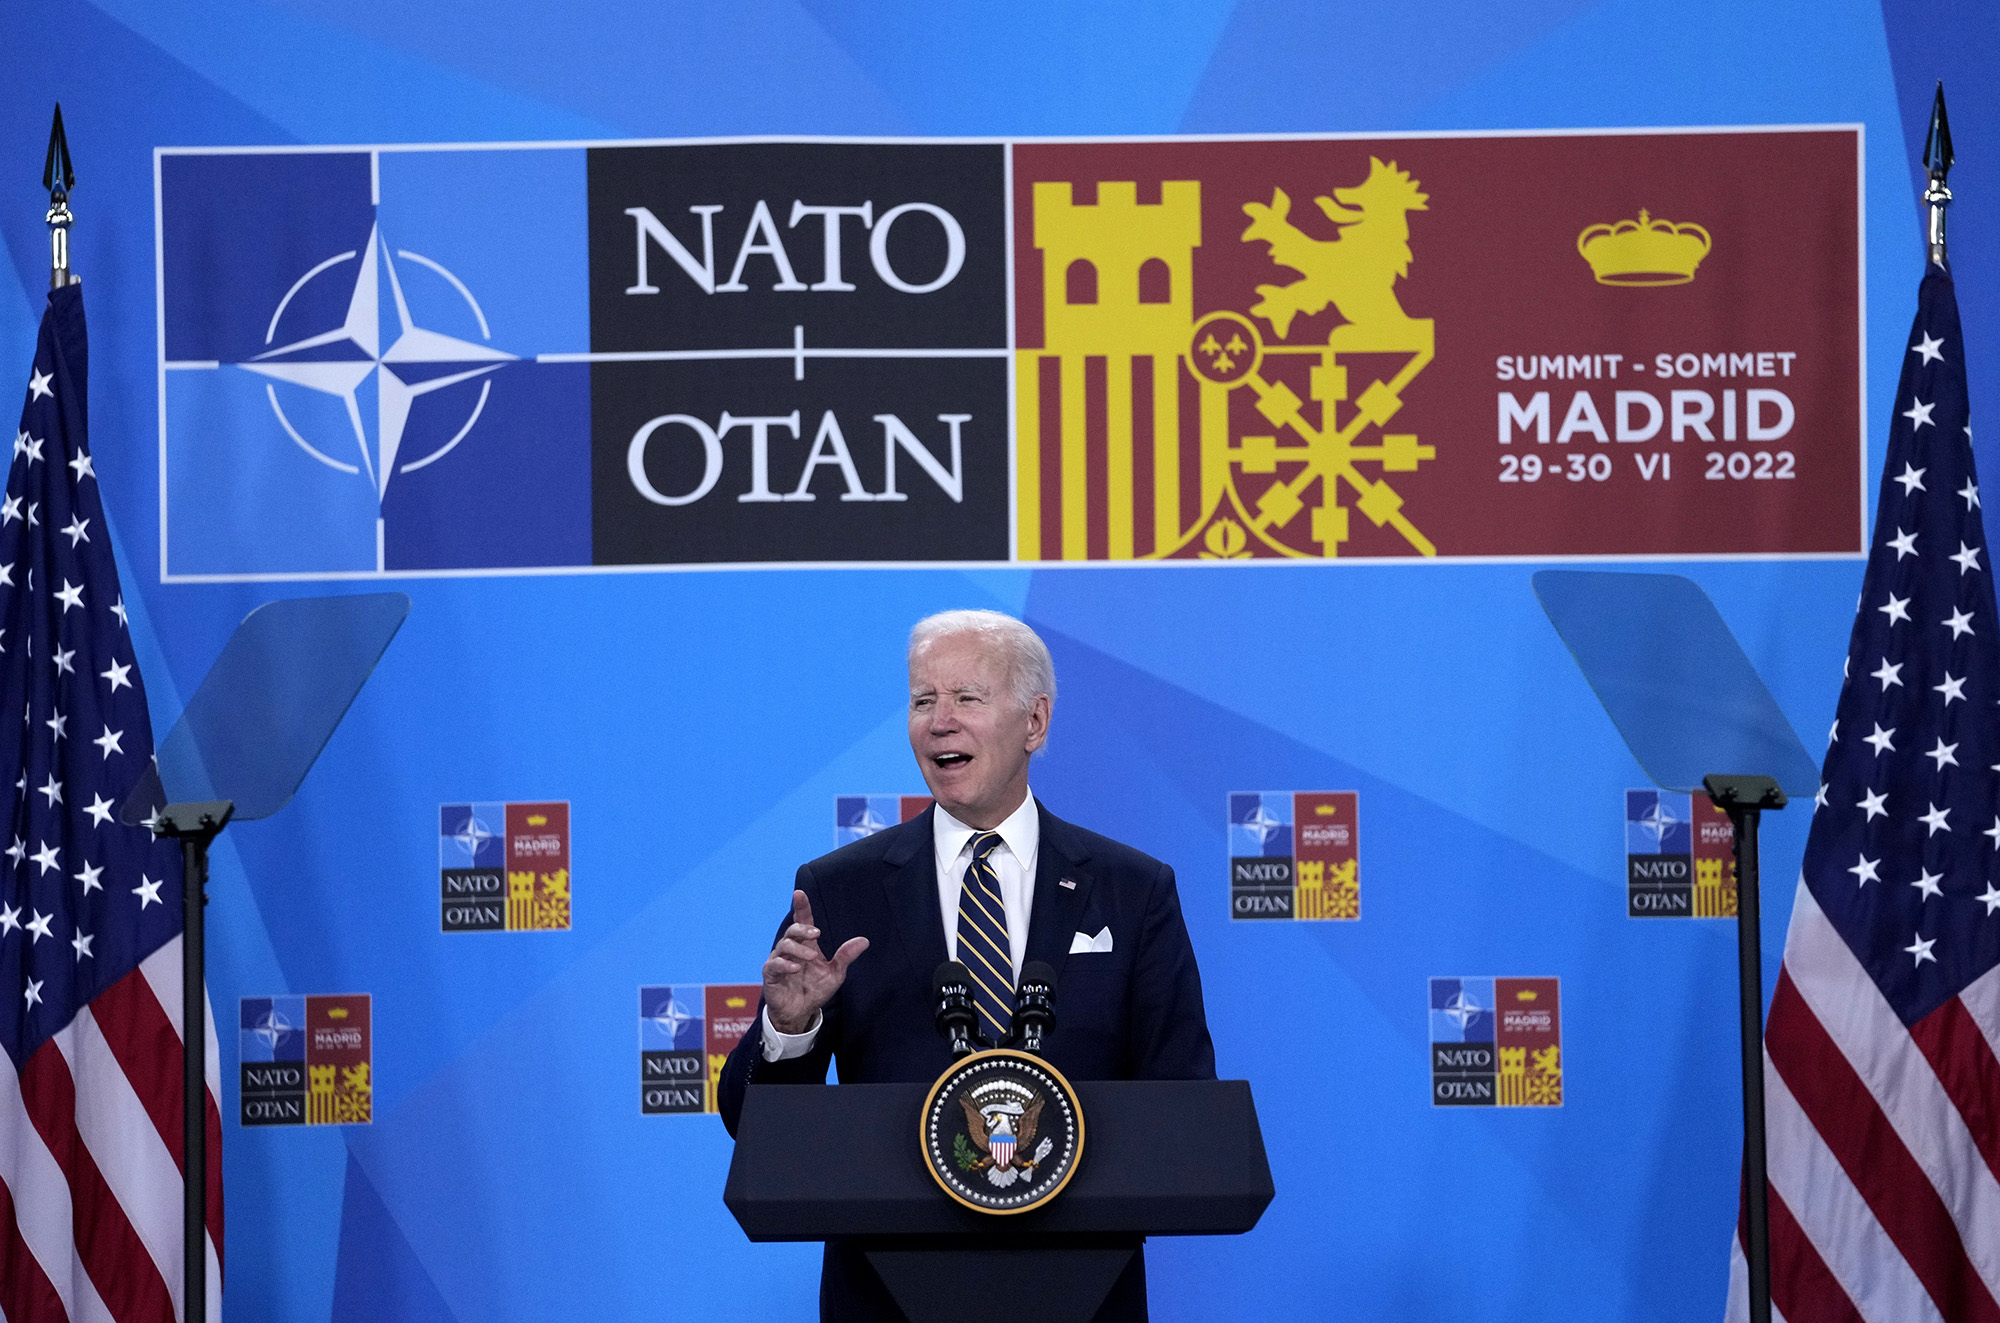 U.S. President Joe Biden speaks during a media conference at the end of a NATO summit in Madrid, Spain, ON June 30.